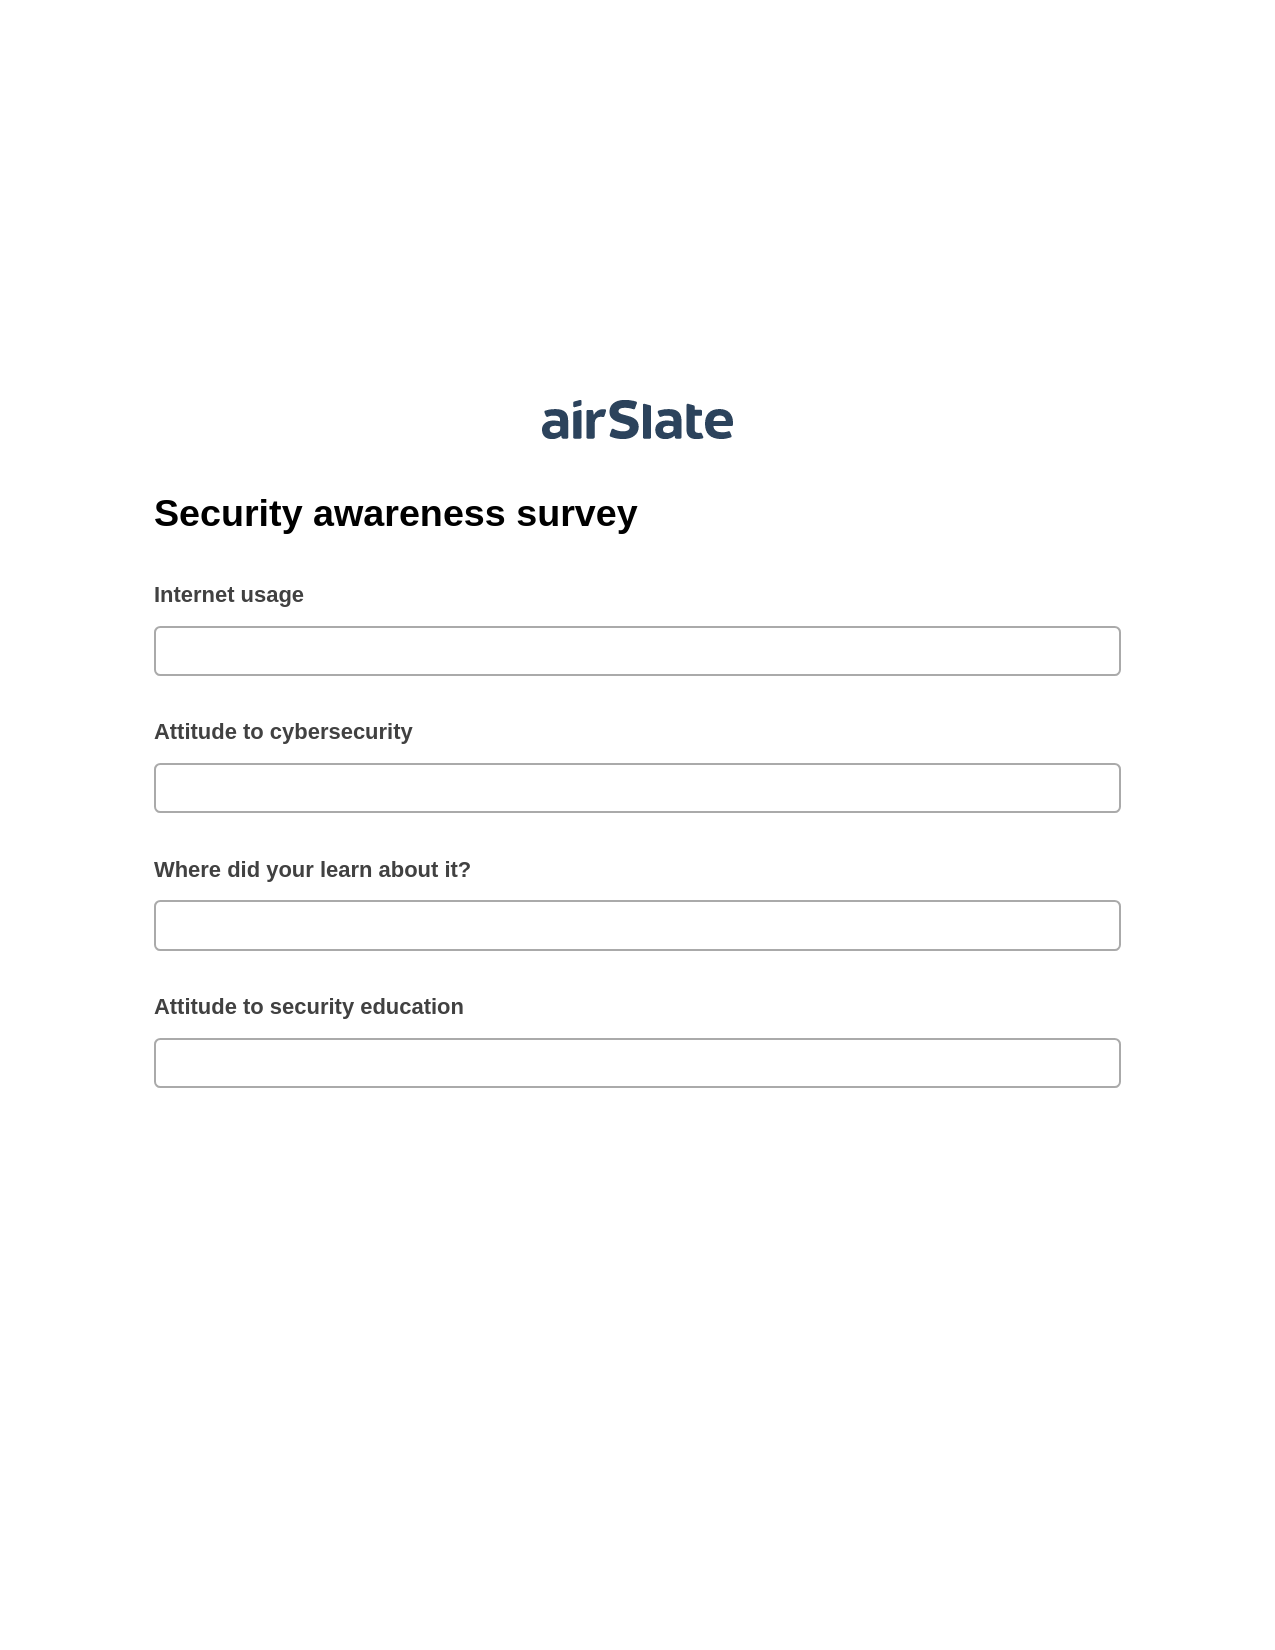 Security awareness survey Pre-fill from another Slate Bot, Open as Role Bot, Export to Excel 365 Bot